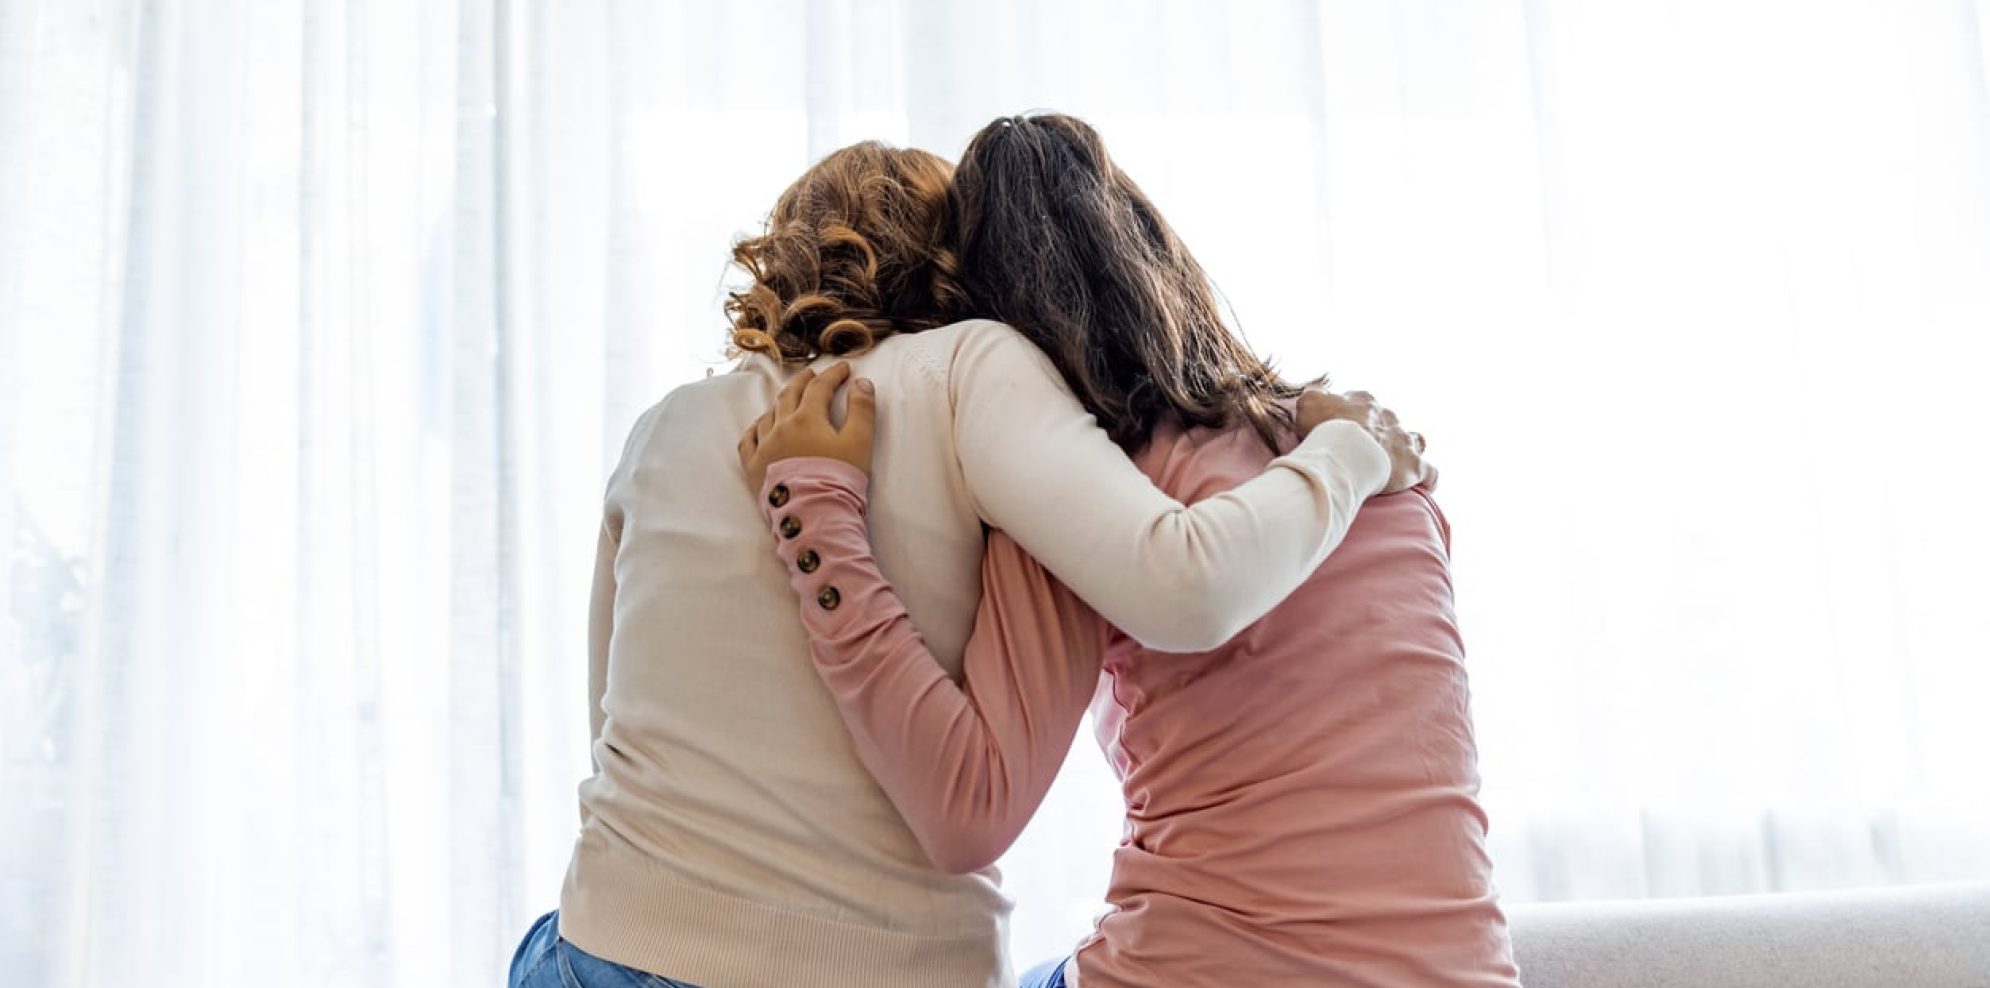 Rear back view of a mother and daughter embrace sitting on bed at home, older sister consoling younger teen, girl suffers from unrequited love share secrets trustworthy person relative people concept